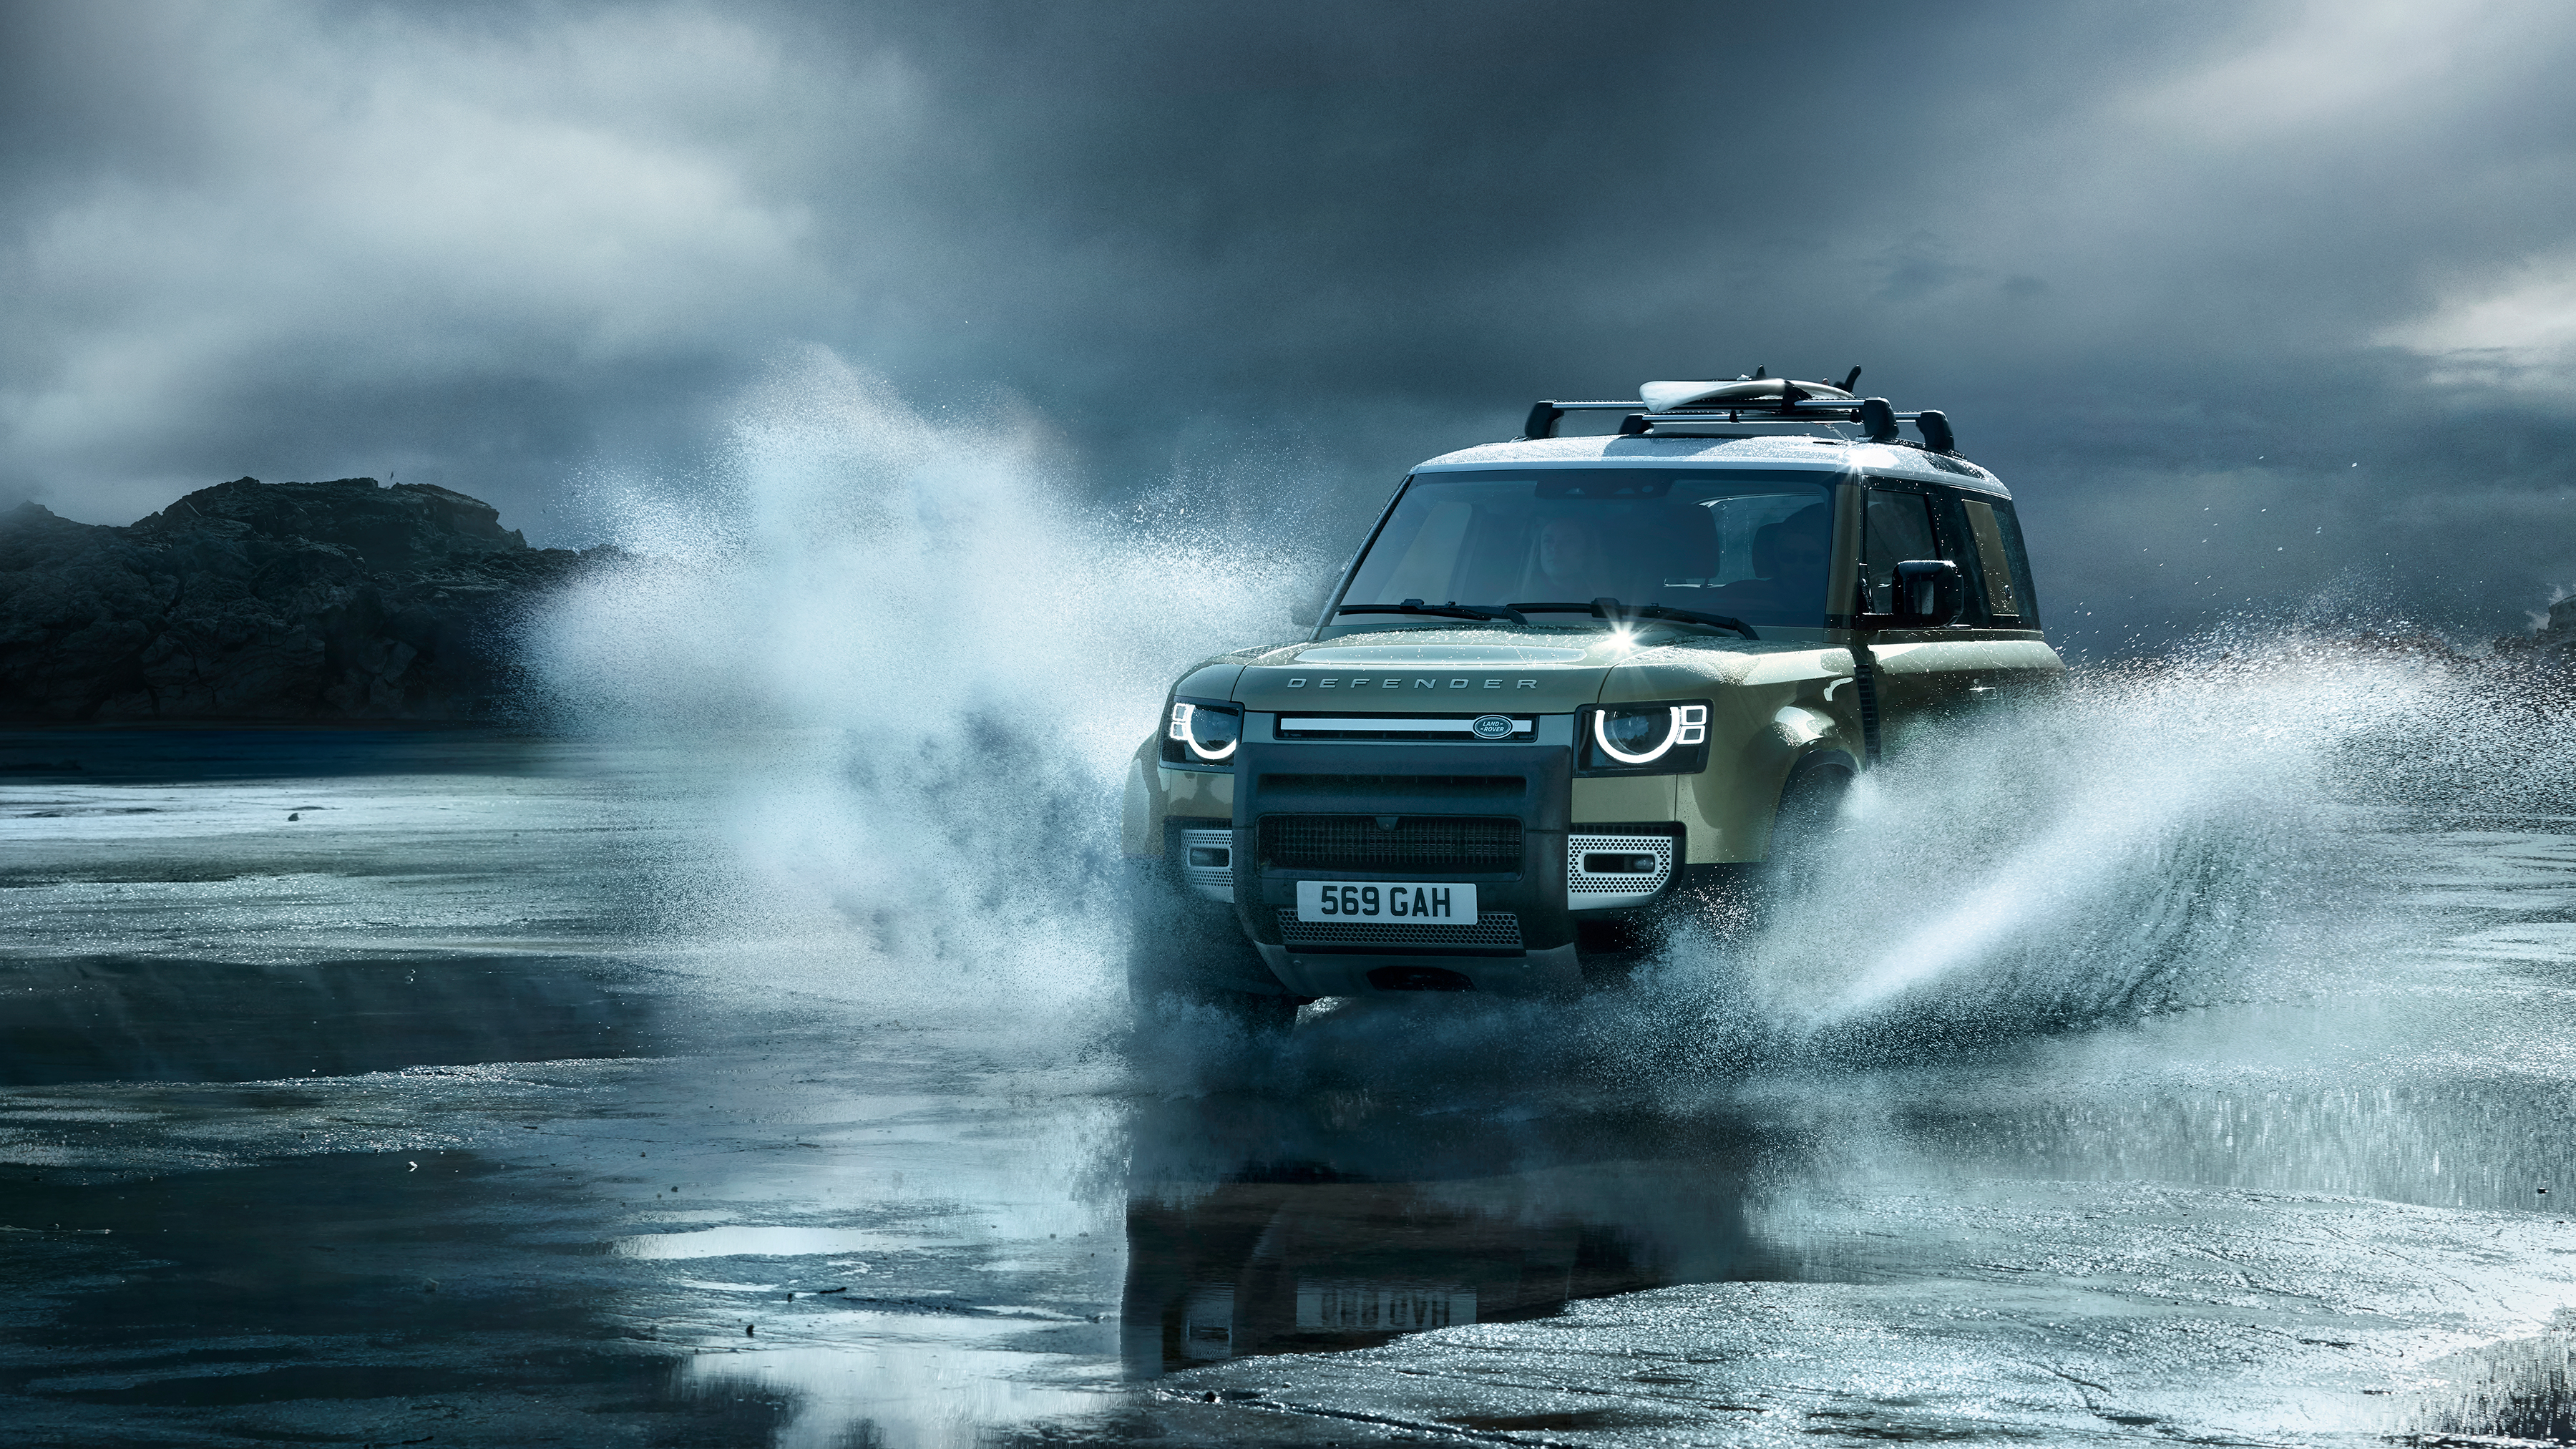 Trigger Shoots Land Rover Defender Spain photoshoot